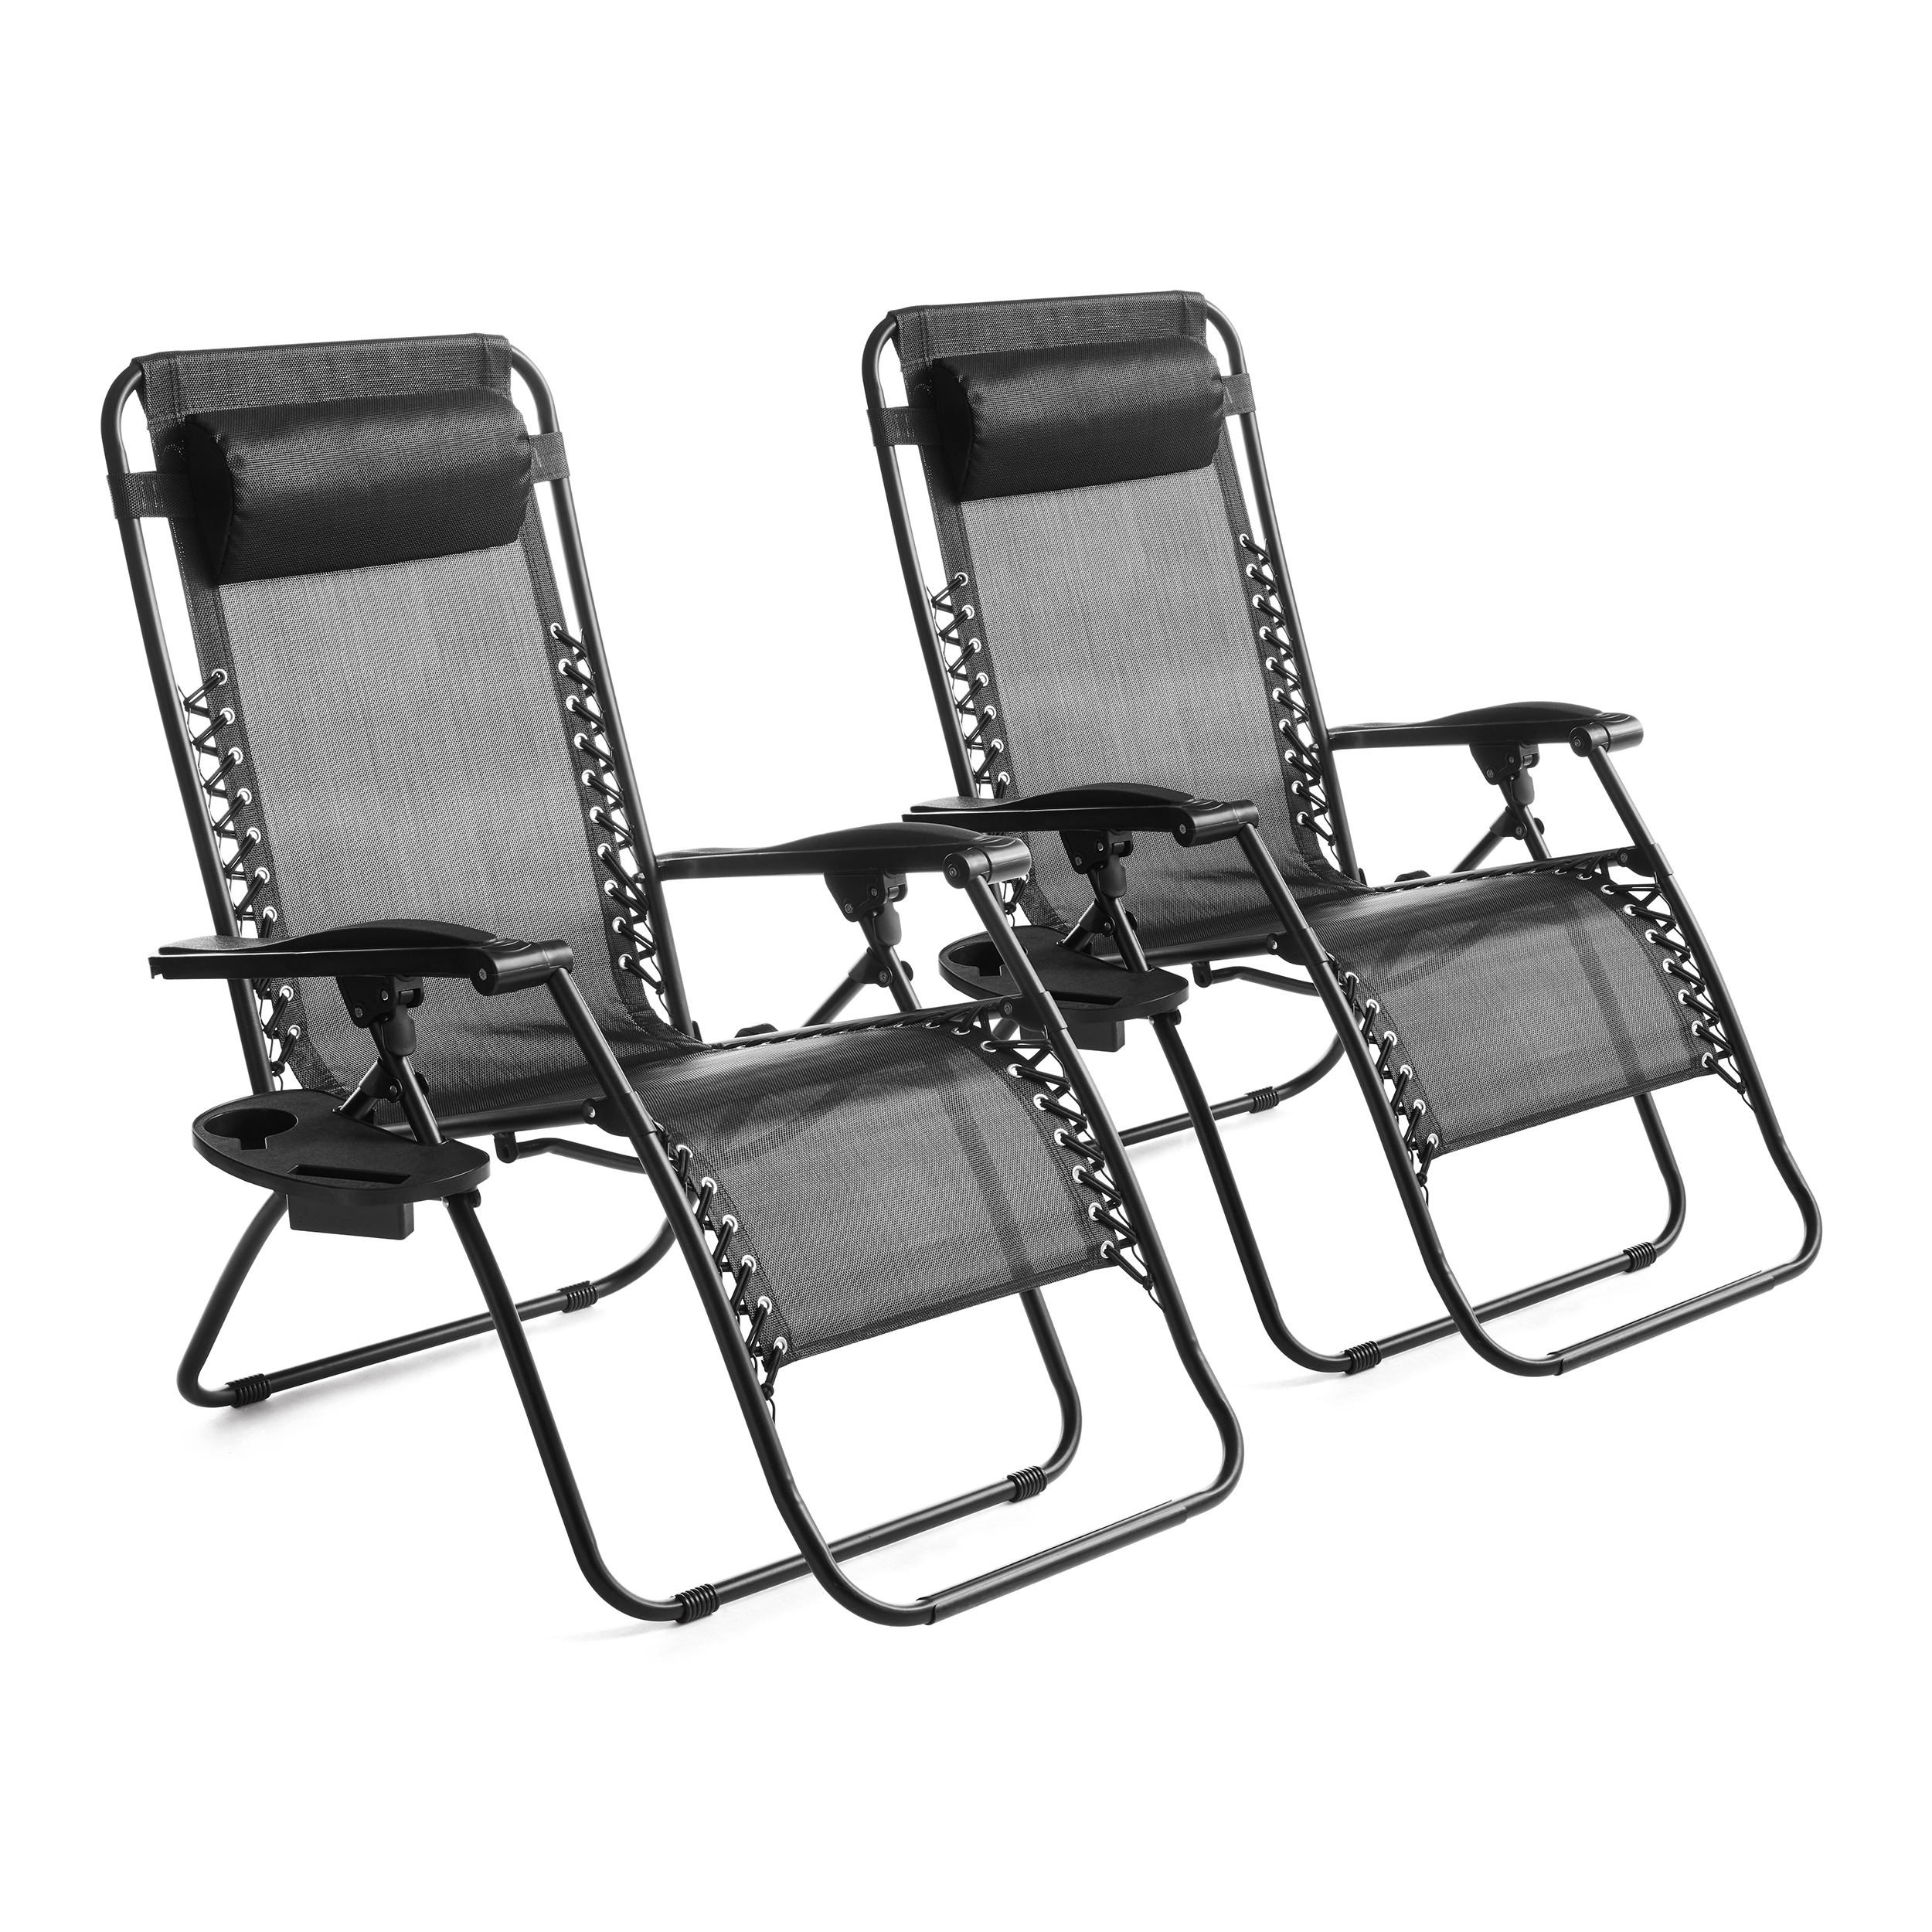 Mainstays Zero Gravity Chair Lounger, 2 Pack - All Colors $79